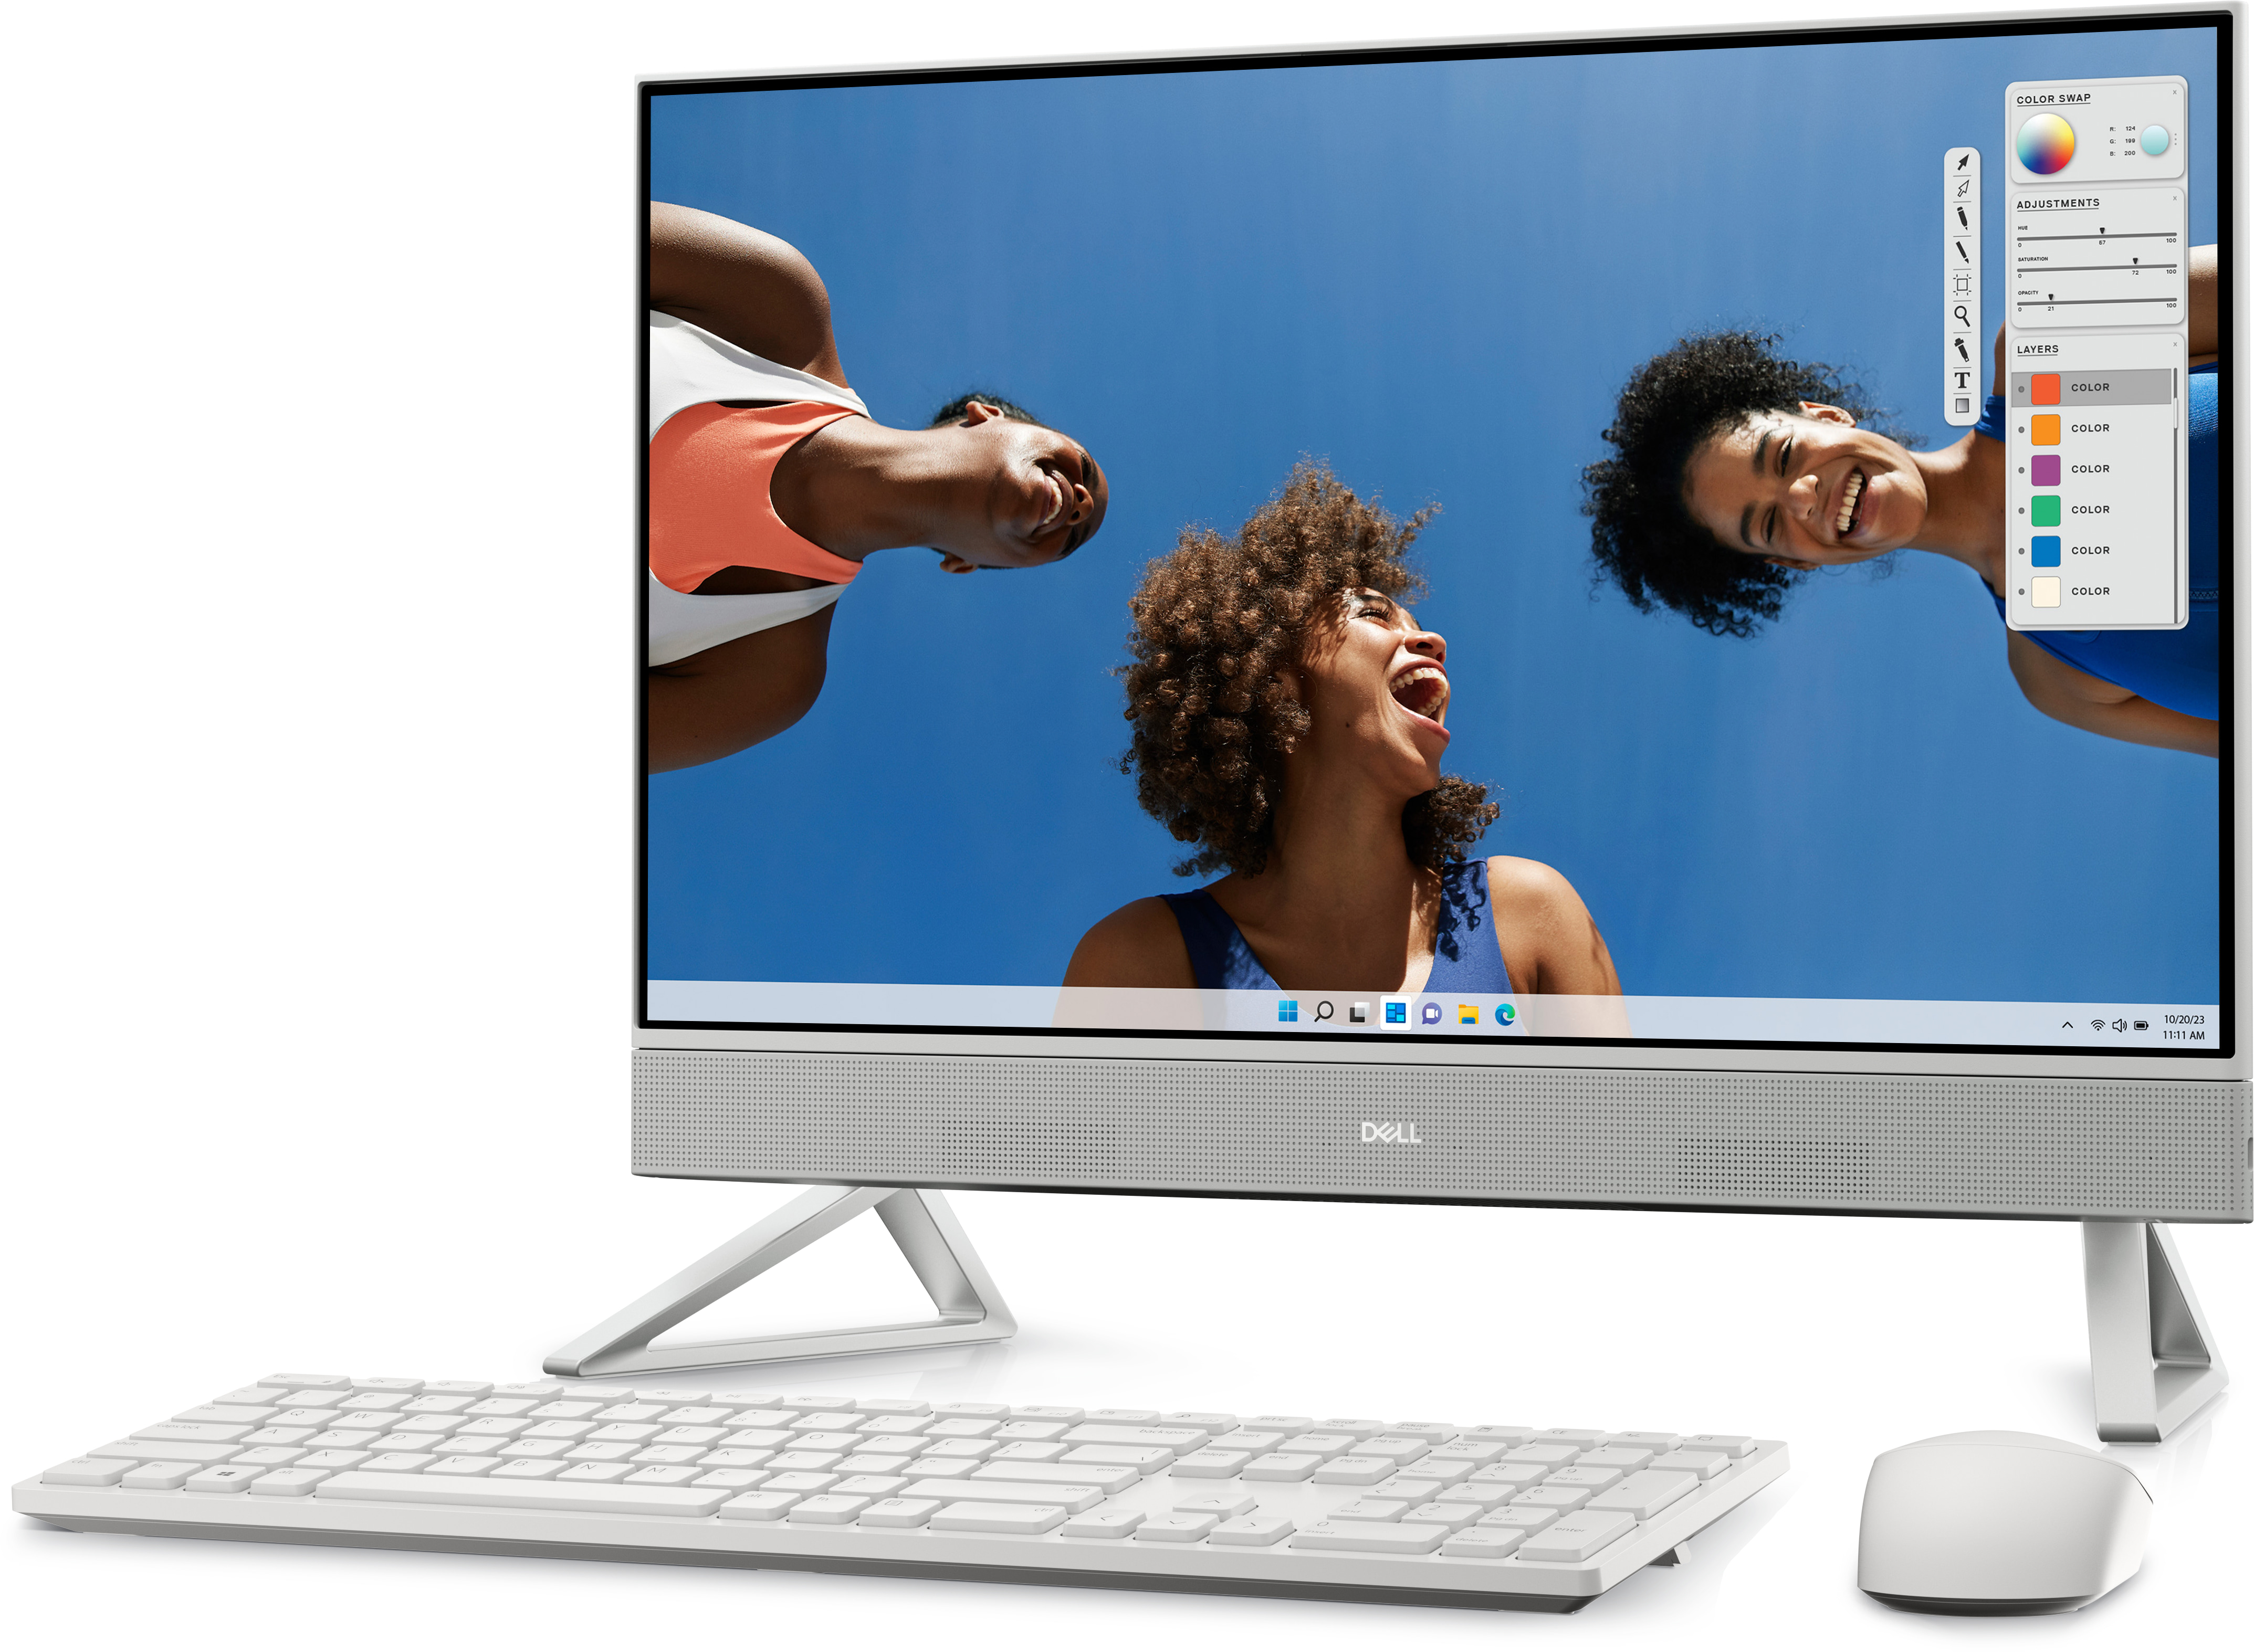 Dell Inspiron 24 All-In-One computer with Windows 11 | Dell USA